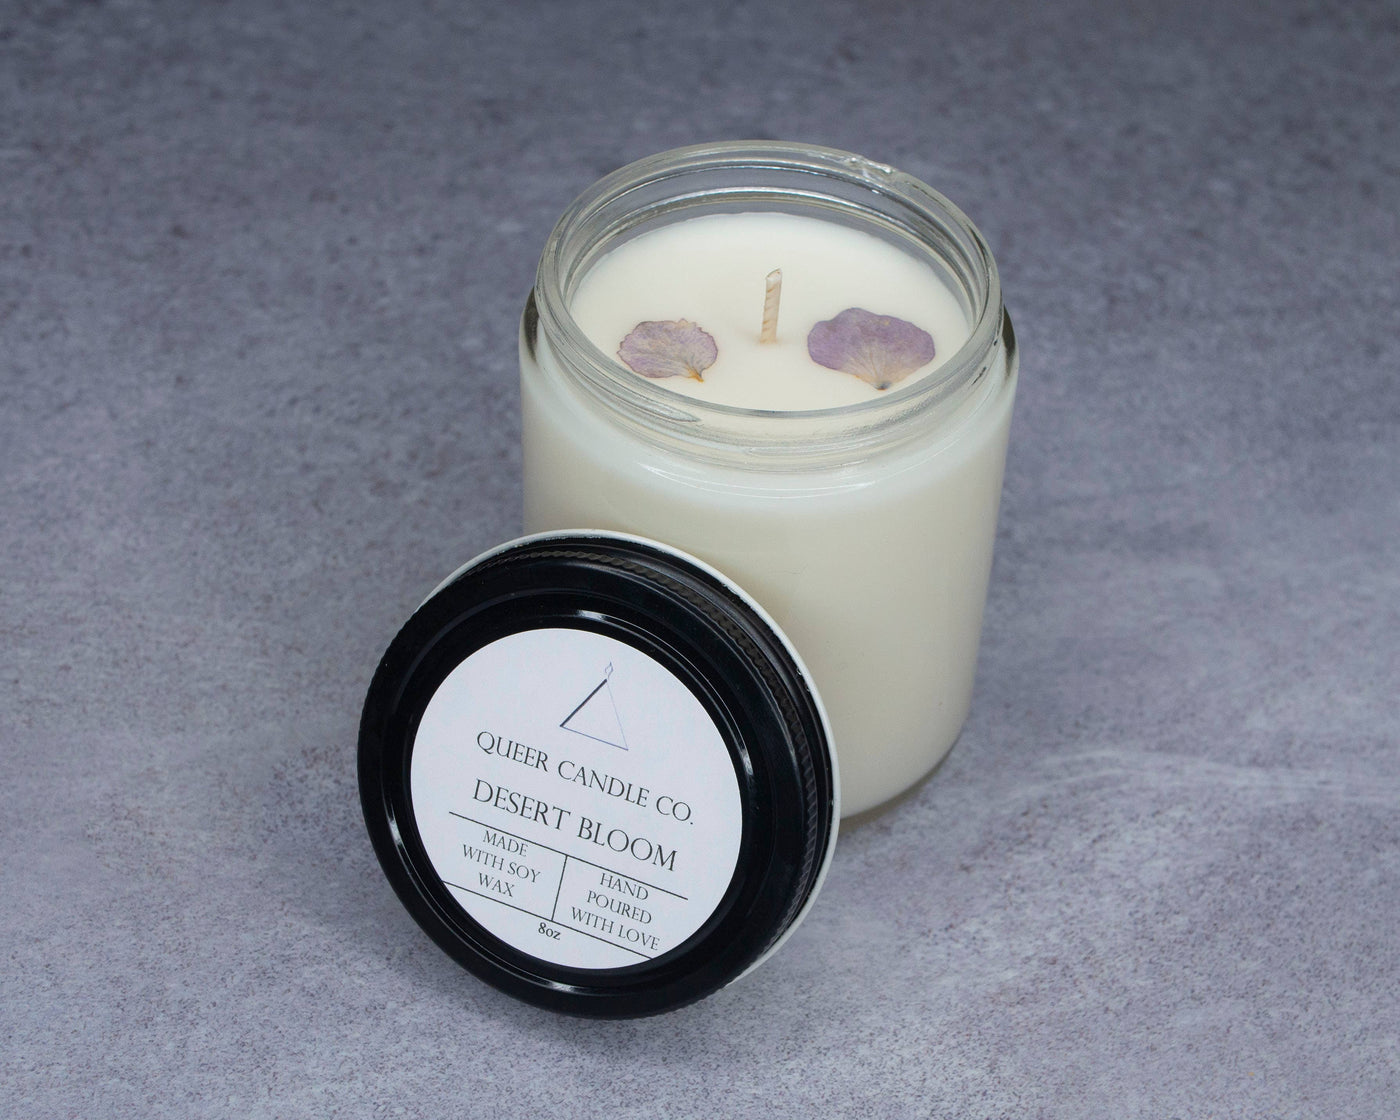 Queer Candle Co. Desert Bloom Candle: Clear Glass Jar - Simple Good